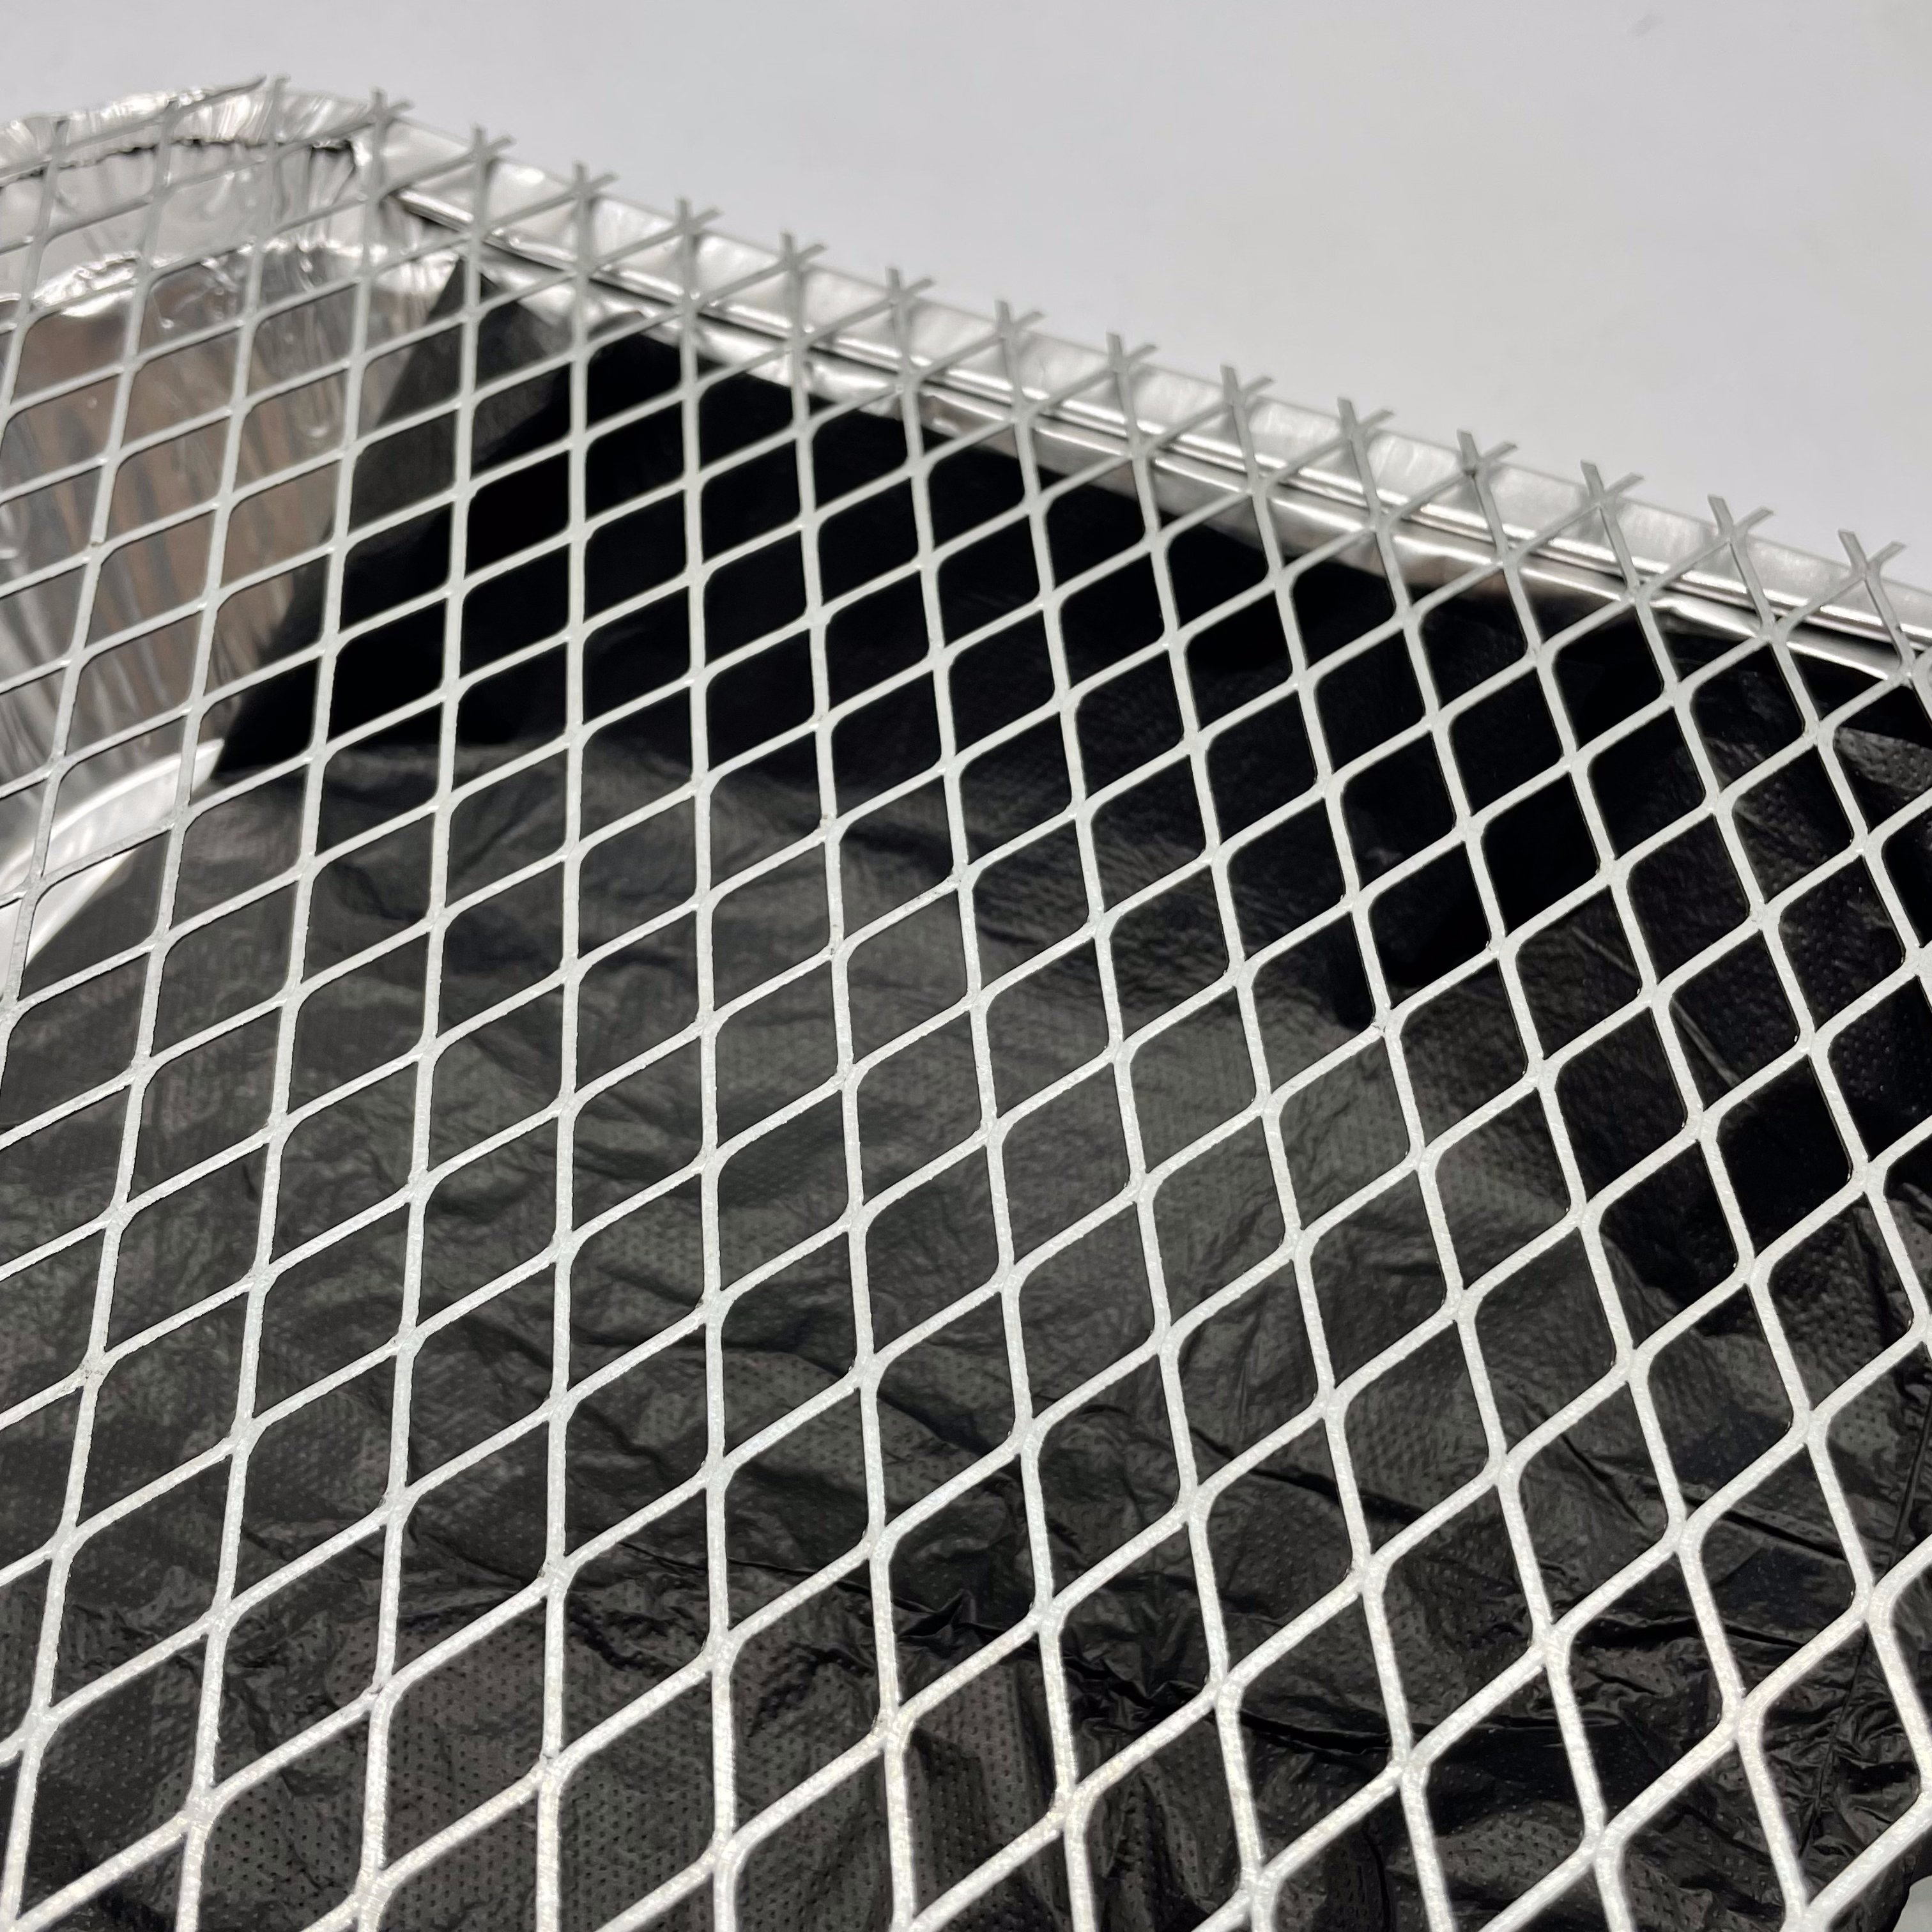 Expanded metal barbecue mesh